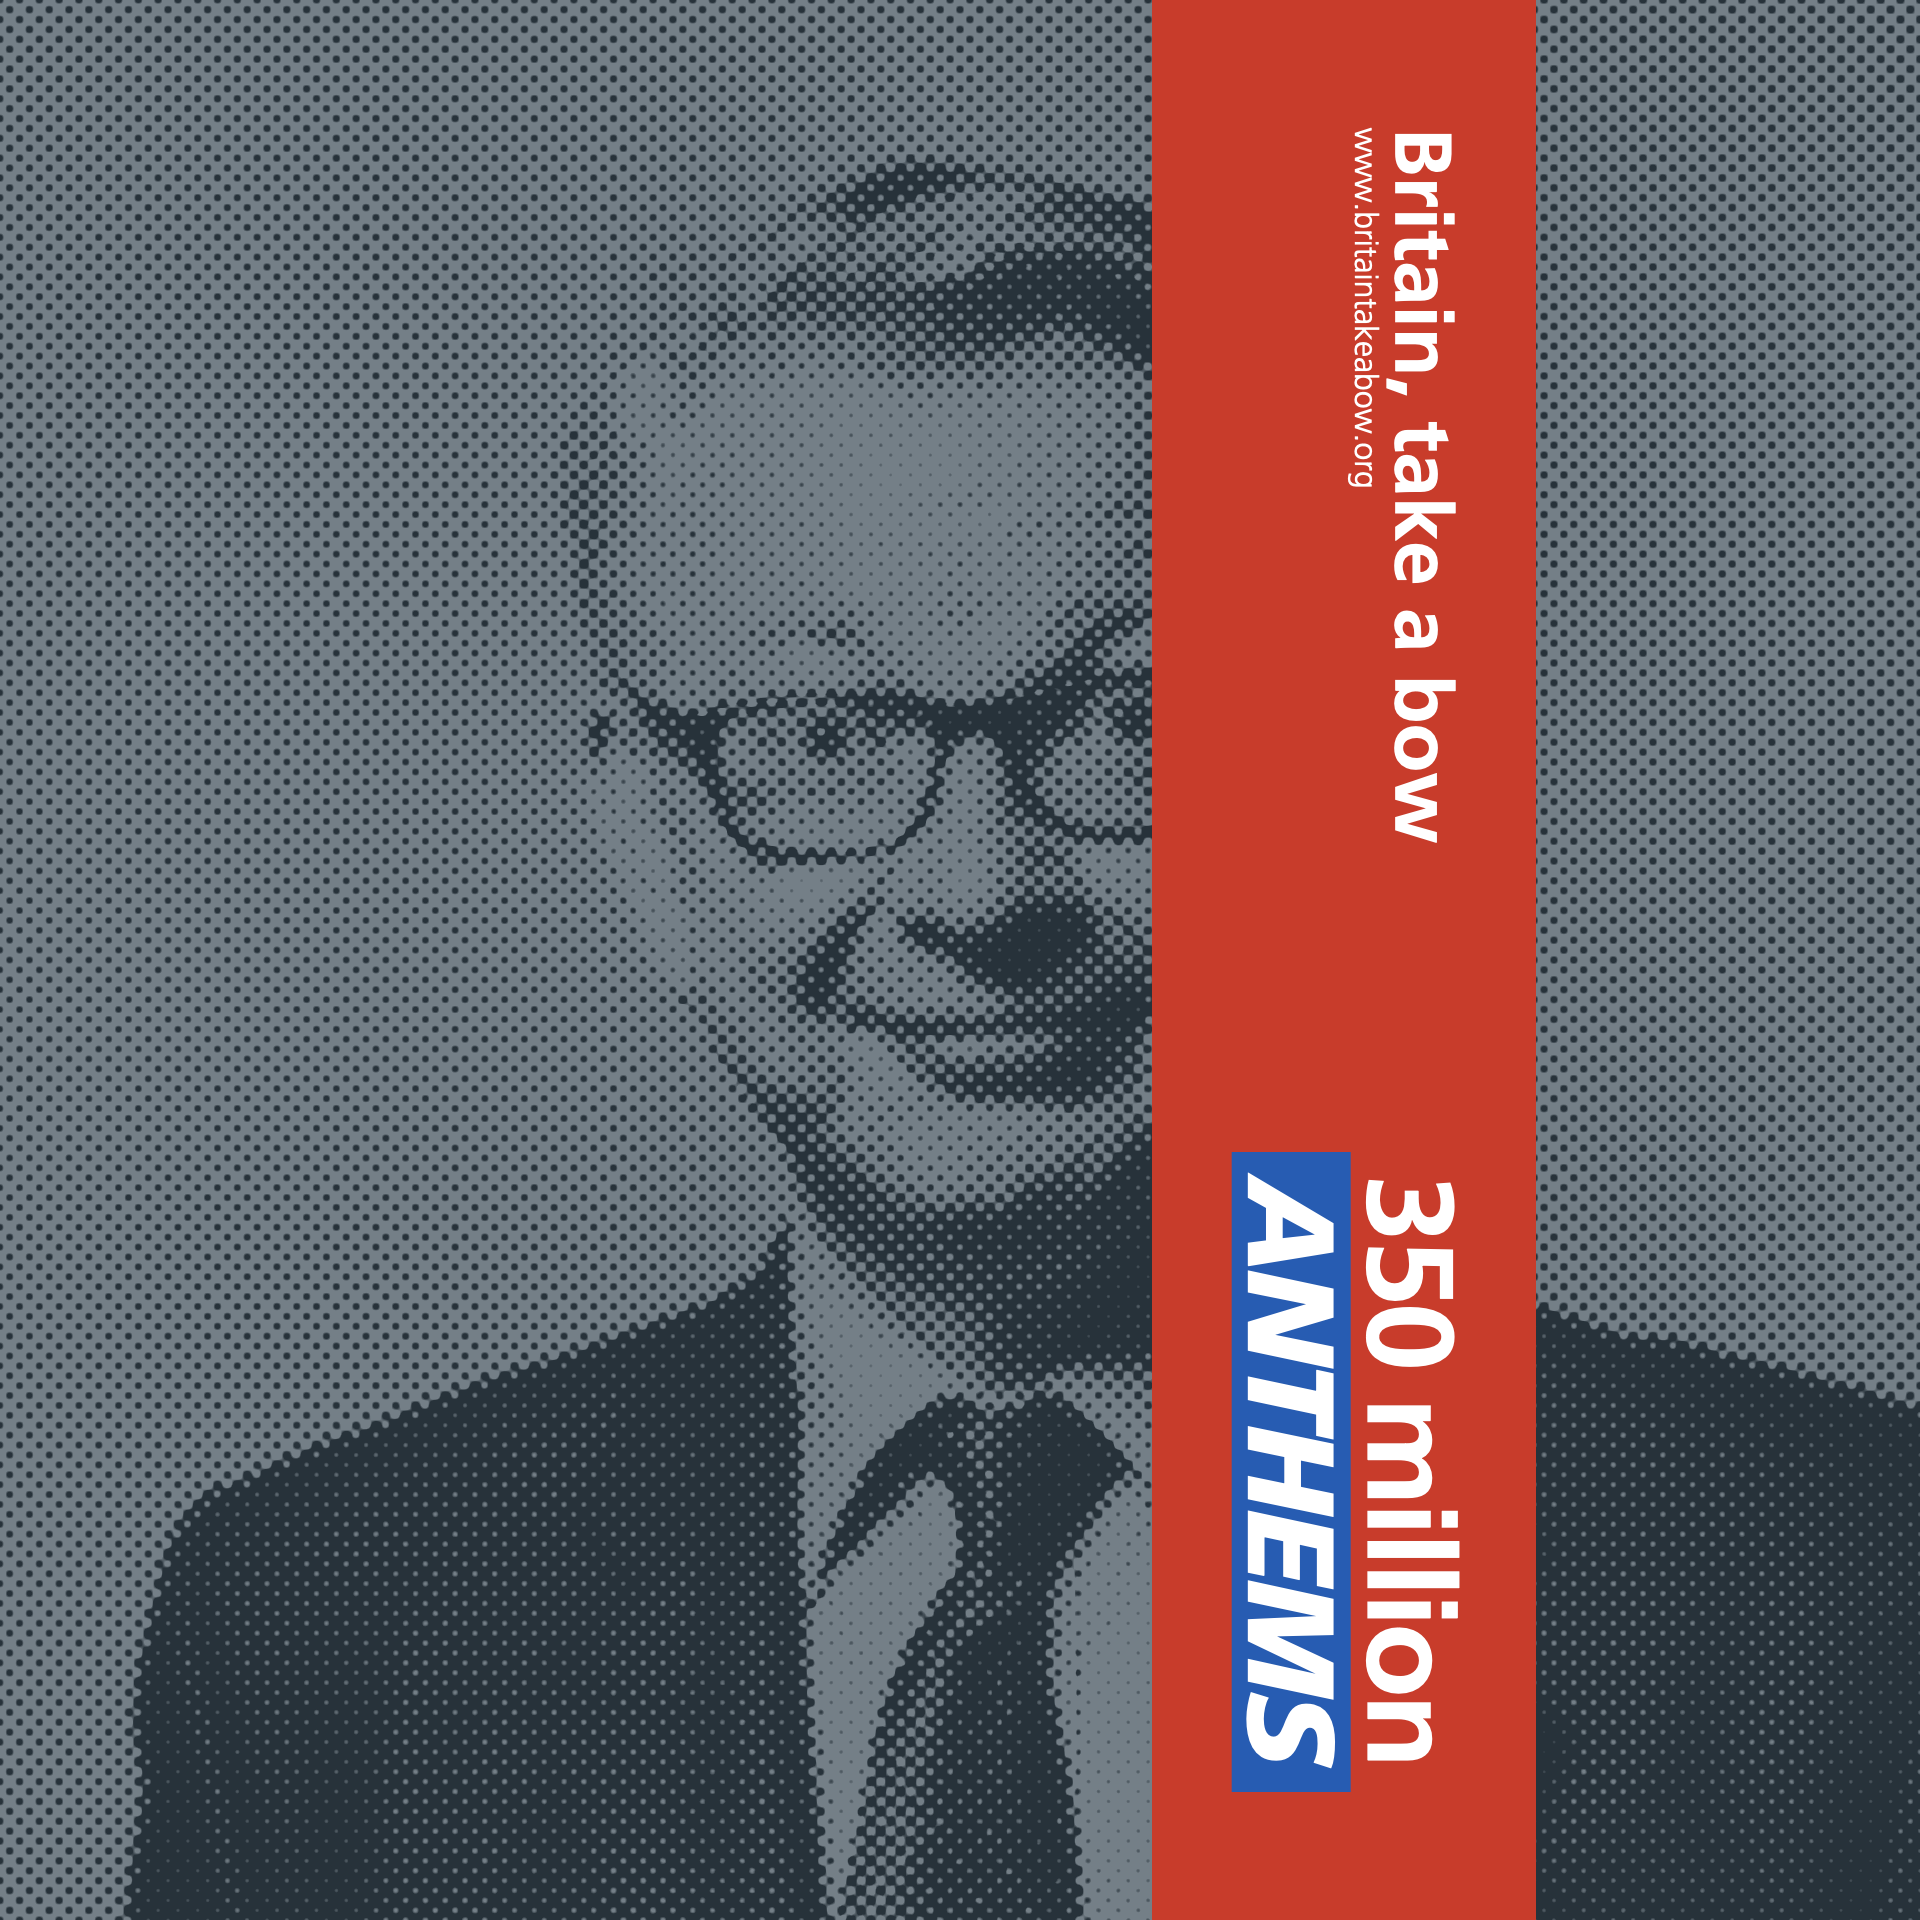 Anthem 4 cover art showing a smug-looking Michael Gove